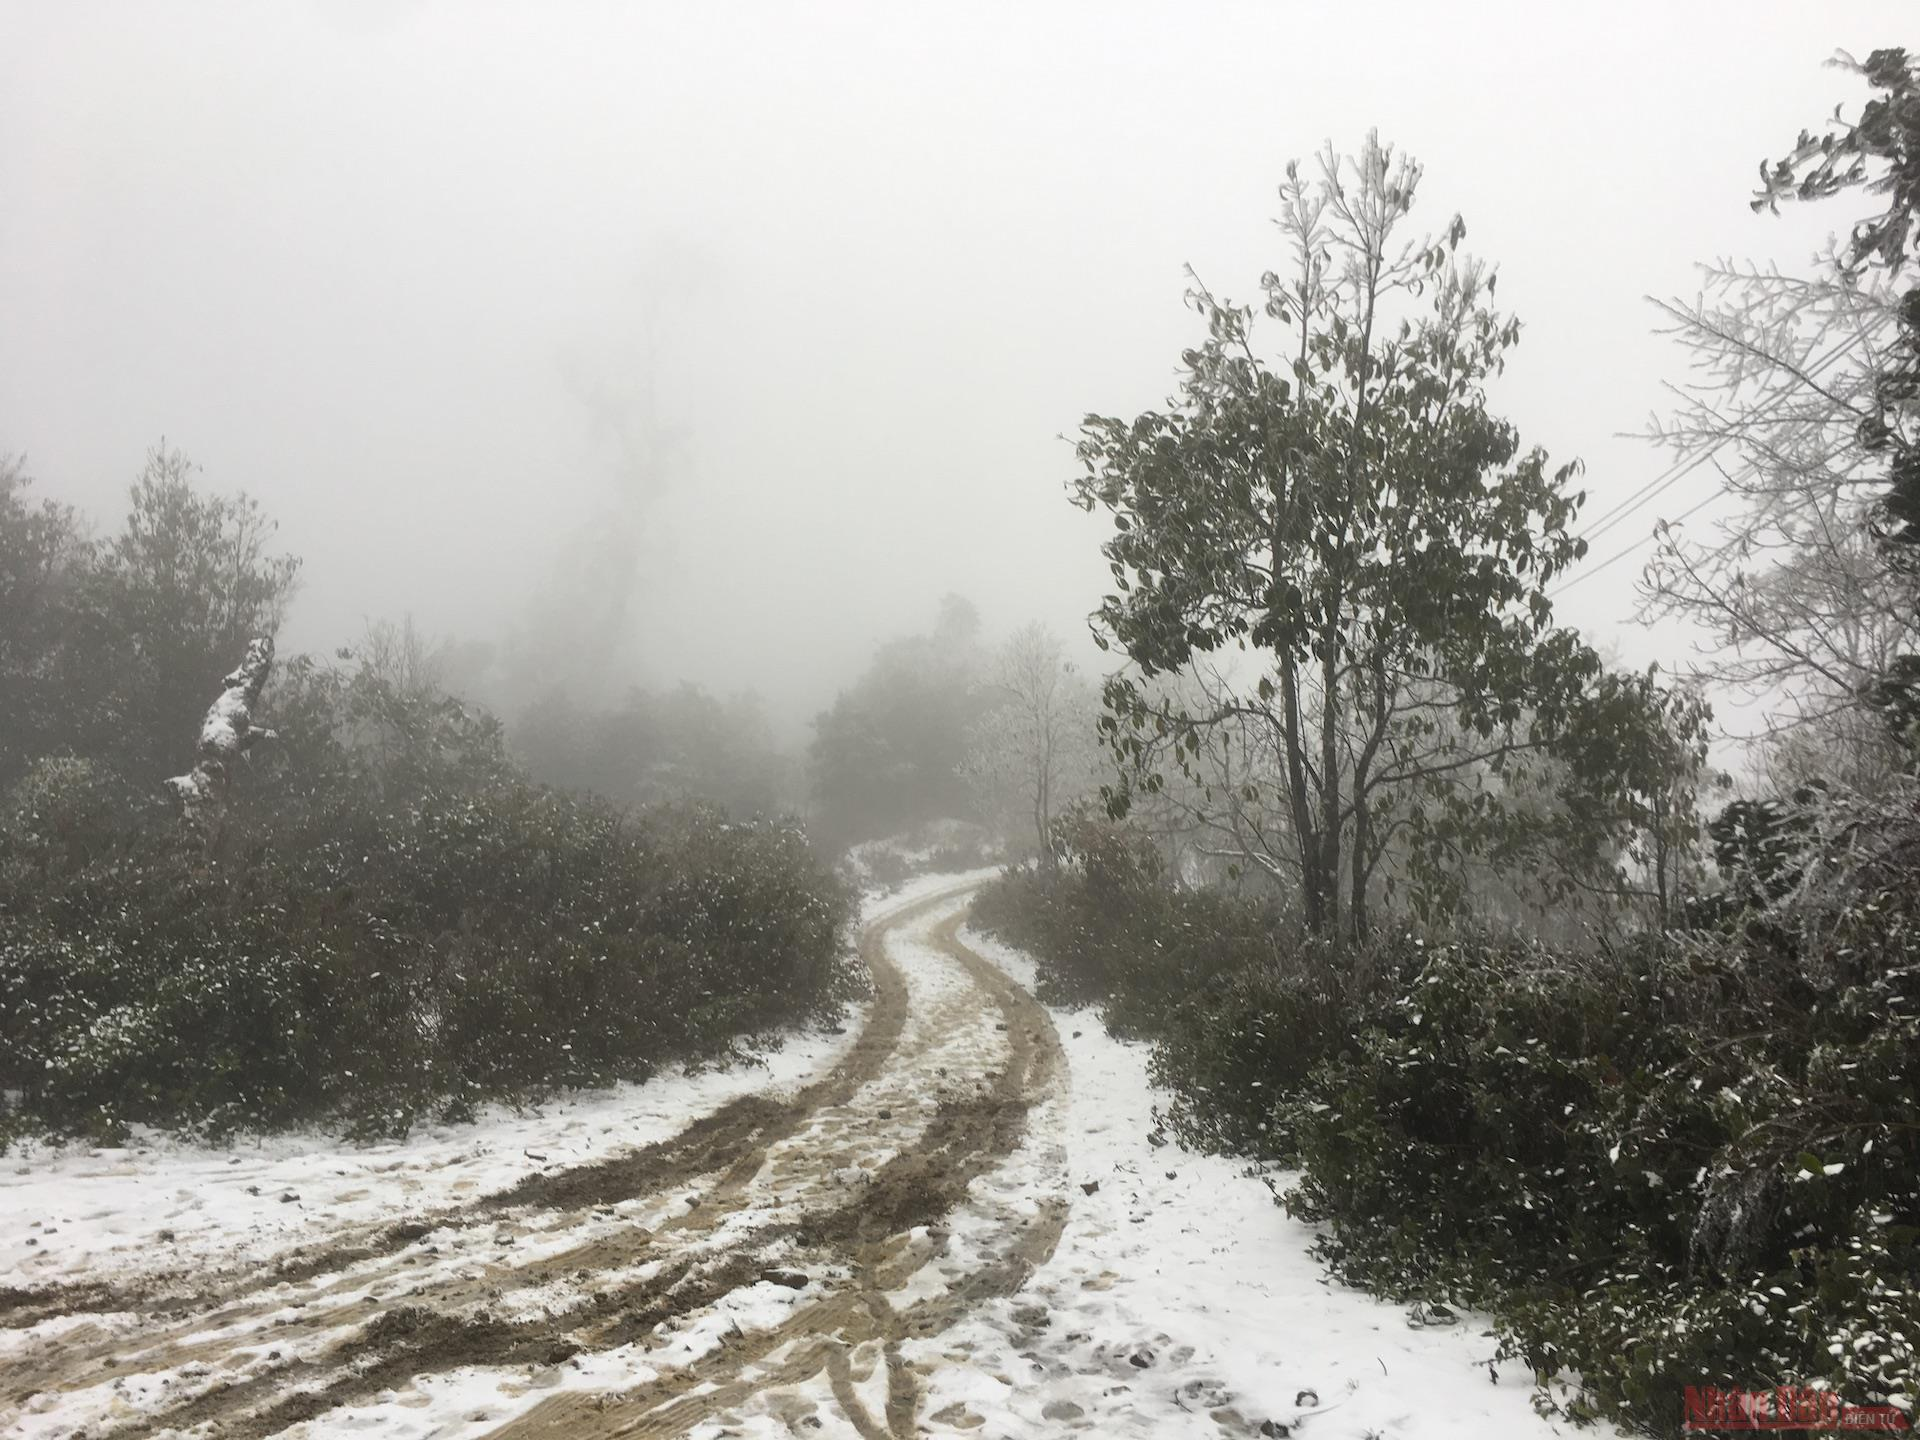 Northern Vietnam mountains engulfed in white snow